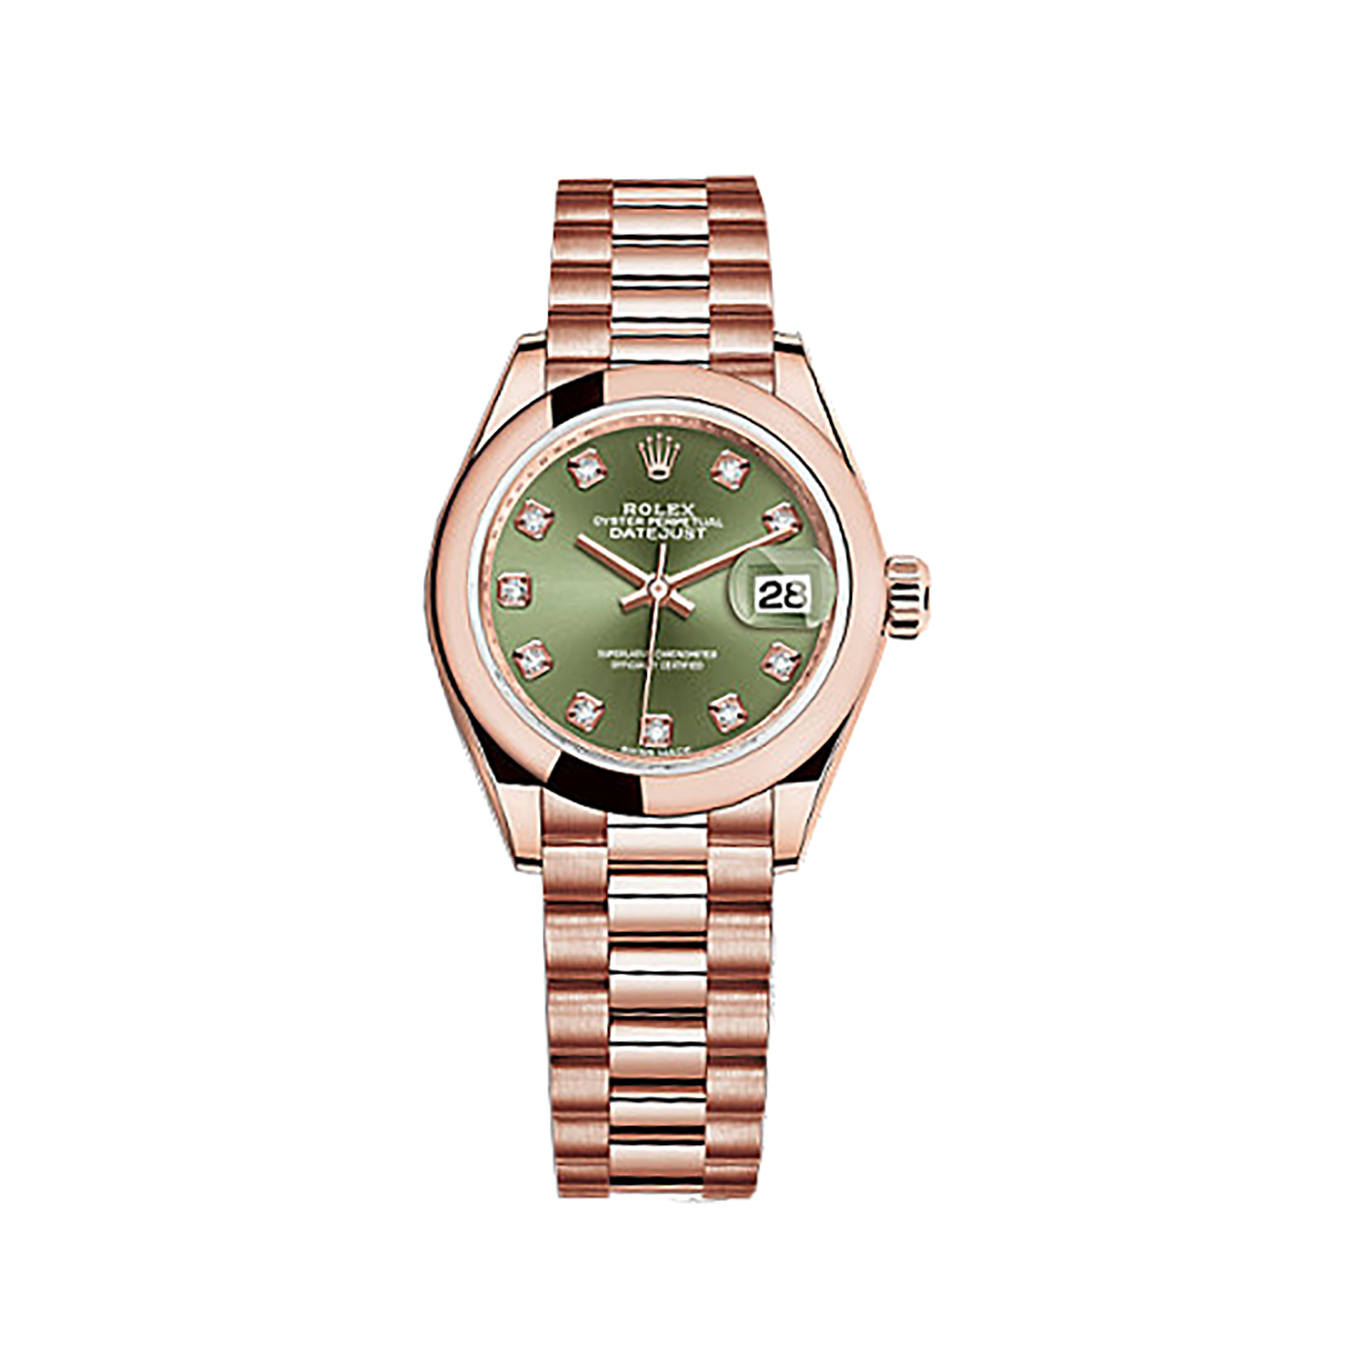 Lady-Datejust 28 279165 Rose Gold Watch (Olive Green Set with Diamonds)